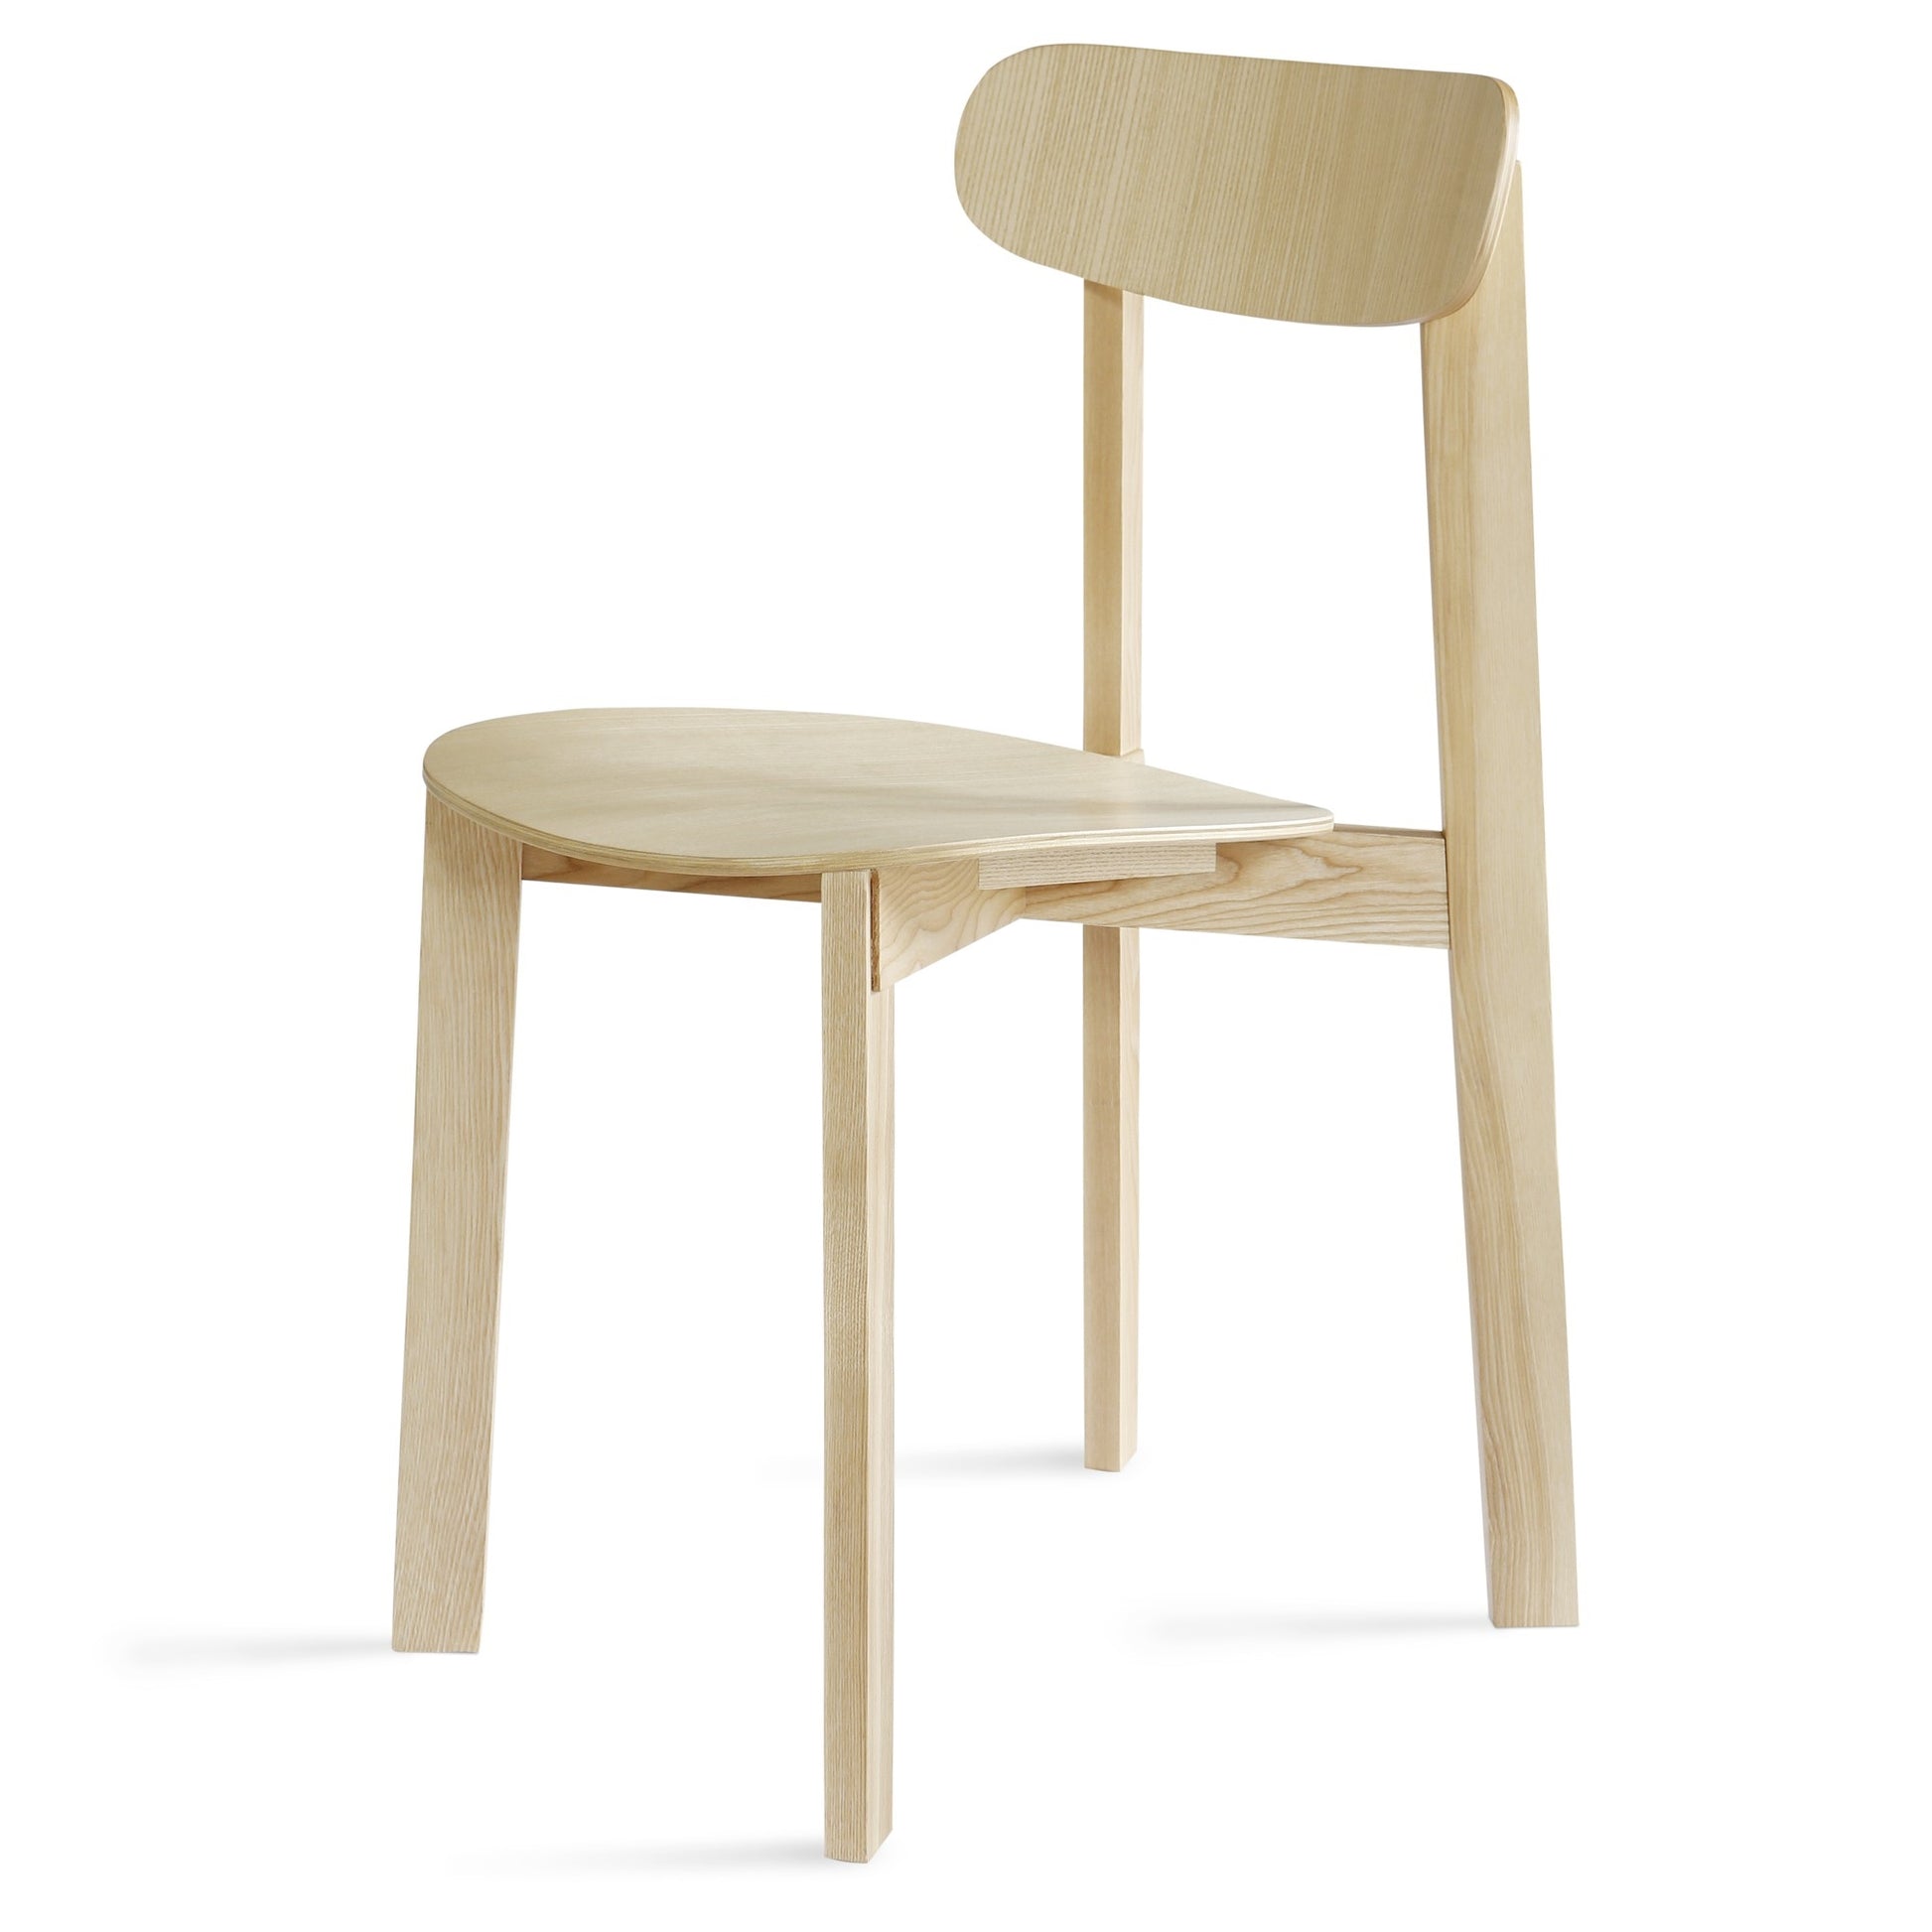 Bondi Dining Chair by Please wait to be seated #Ash Wood